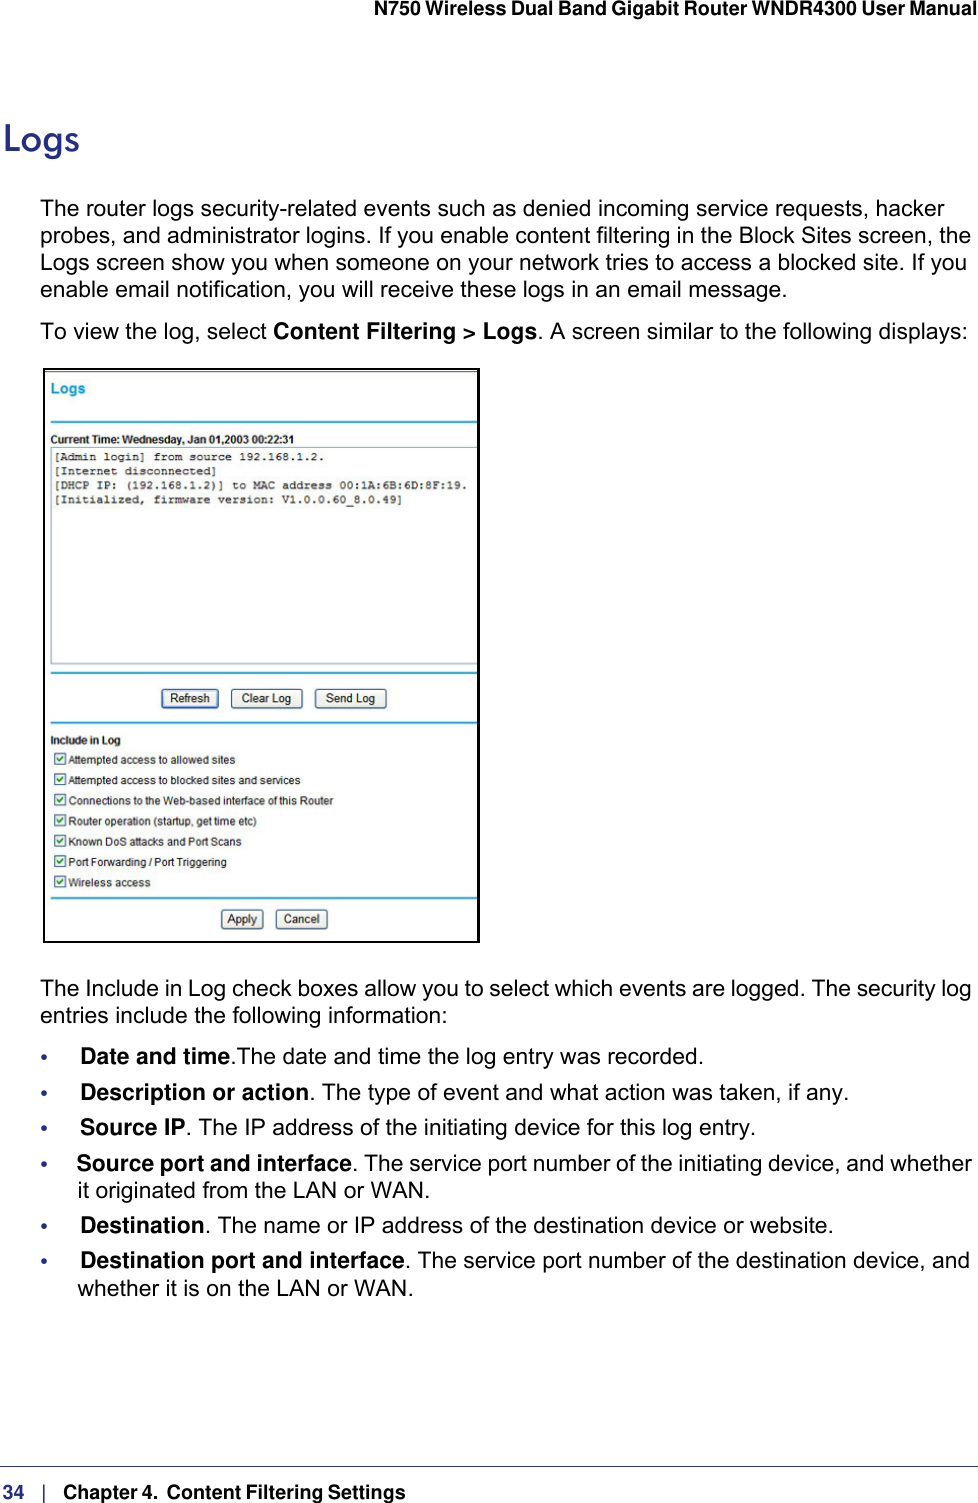 34   |   Chapter 4.  Content Filtering Settings  N750 Wireless Dual Band Gigabit Router WNDR4300 User Manual LogsThe router logs security-related events such as denied incoming service requests, hacker probes, and administrator logins. If you enable content filtering in the Block Sites screen, the Logs screen show you when someone on your network tries to access a blocked site. If you enable email notification, you will receive these logs in an email message. To view the log, select Content Filtering &gt; Logs. A screen similar to the following displays:The Include in Log check boxes allow you to select which events are logged. The security log entries include the following information:•     Date and time.The date and time the log entry was recorded.•     Description or action. The type of event and what action was taken, if any.•     Source IP. The IP address of the initiating device for this log entry.•     Source port and interface. The service port number of the initiating device, and whether it originated from the LAN or WAN.•     Destination. The name or IP address of the destination device or website.•     Destination port and interface. The service port number of the destination device, and whether it is on the LAN or WAN.